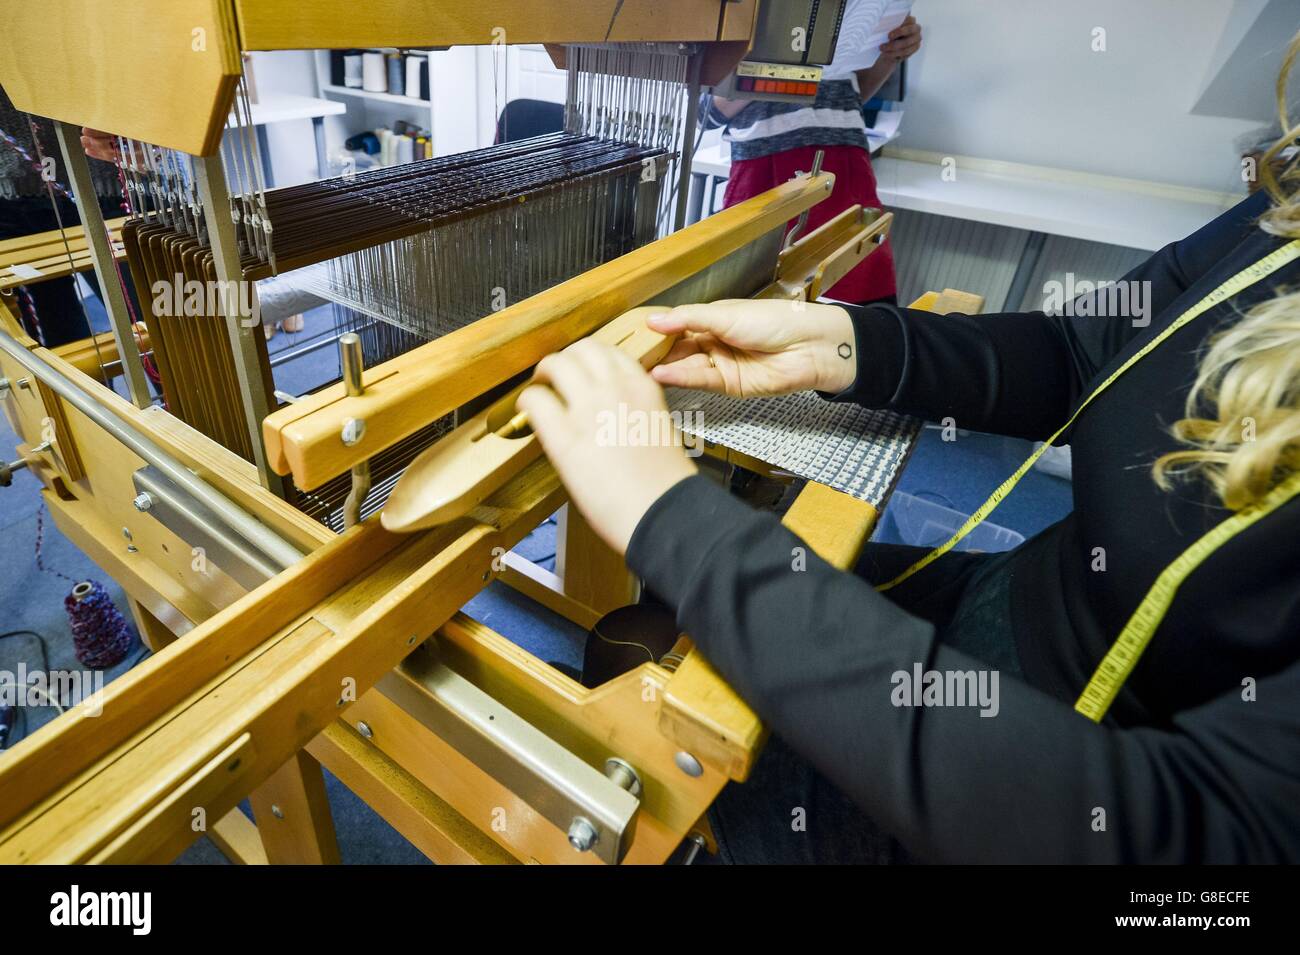 s first all-female weaving mill using traditional style wooden weaving looms at The Bristol Weaving Mill, the first working cloth mill in Bristol in nearly 100 years. Stock Photo